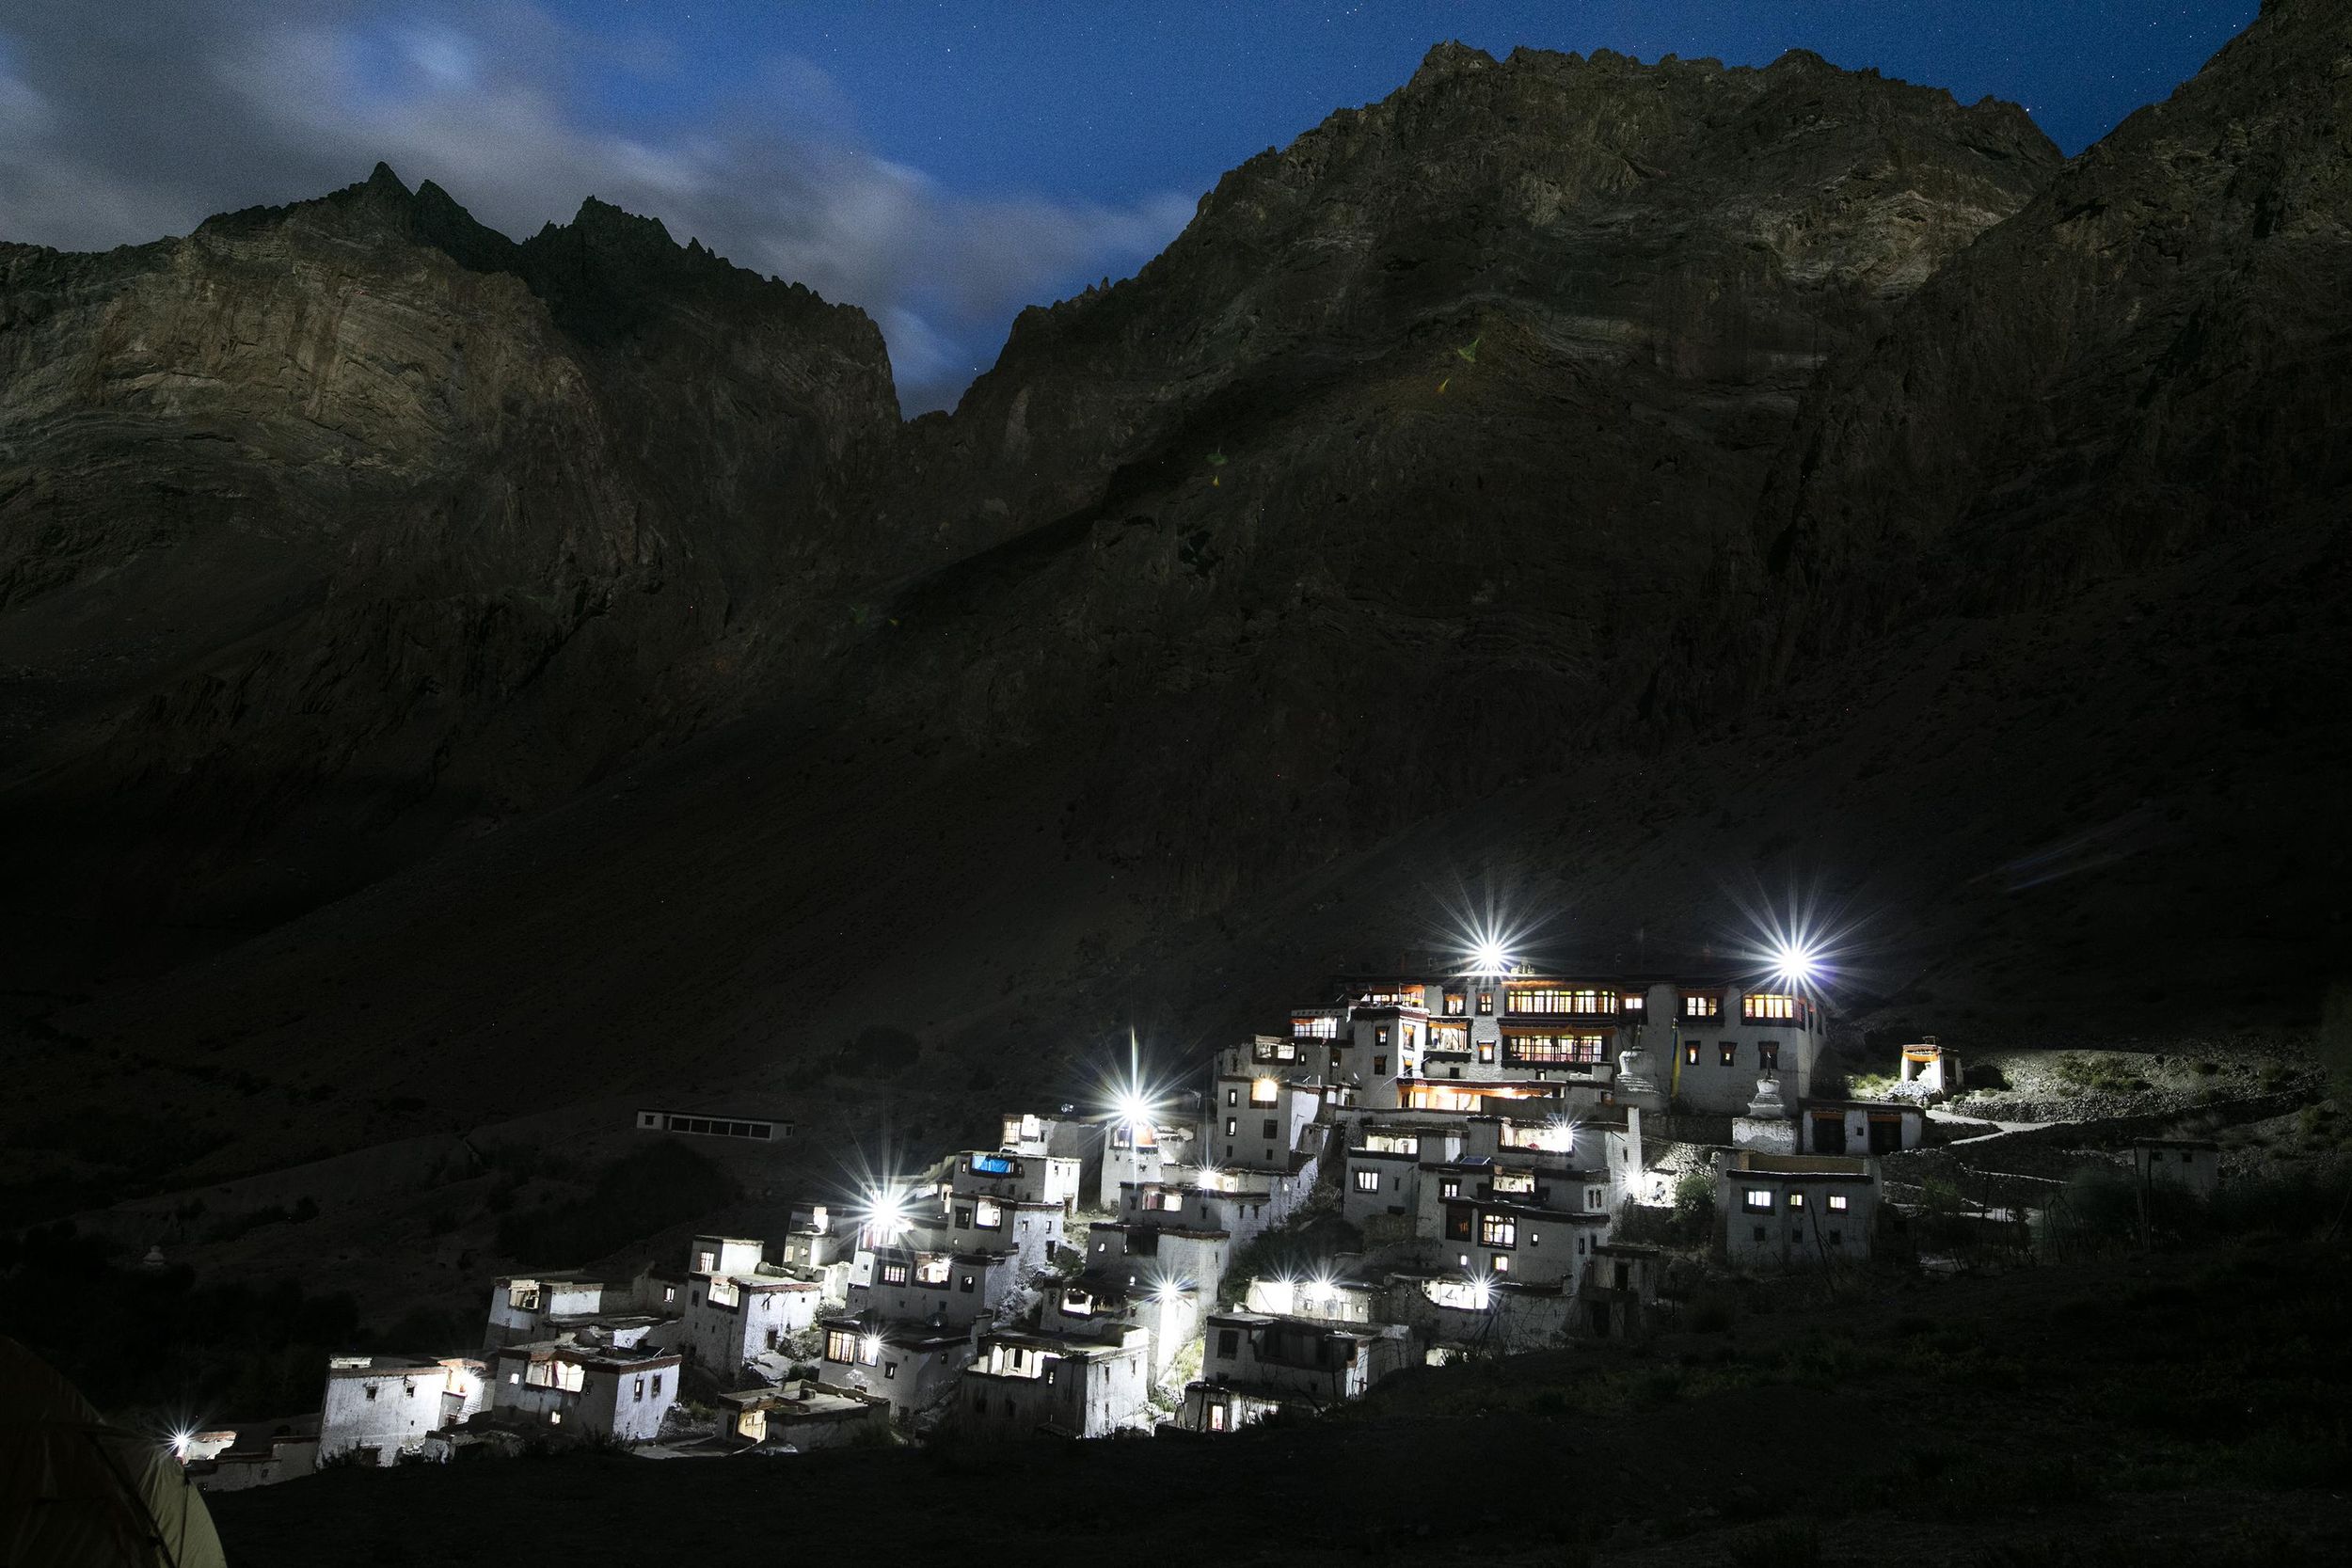 A village lit up with lights on the side of a mountain.